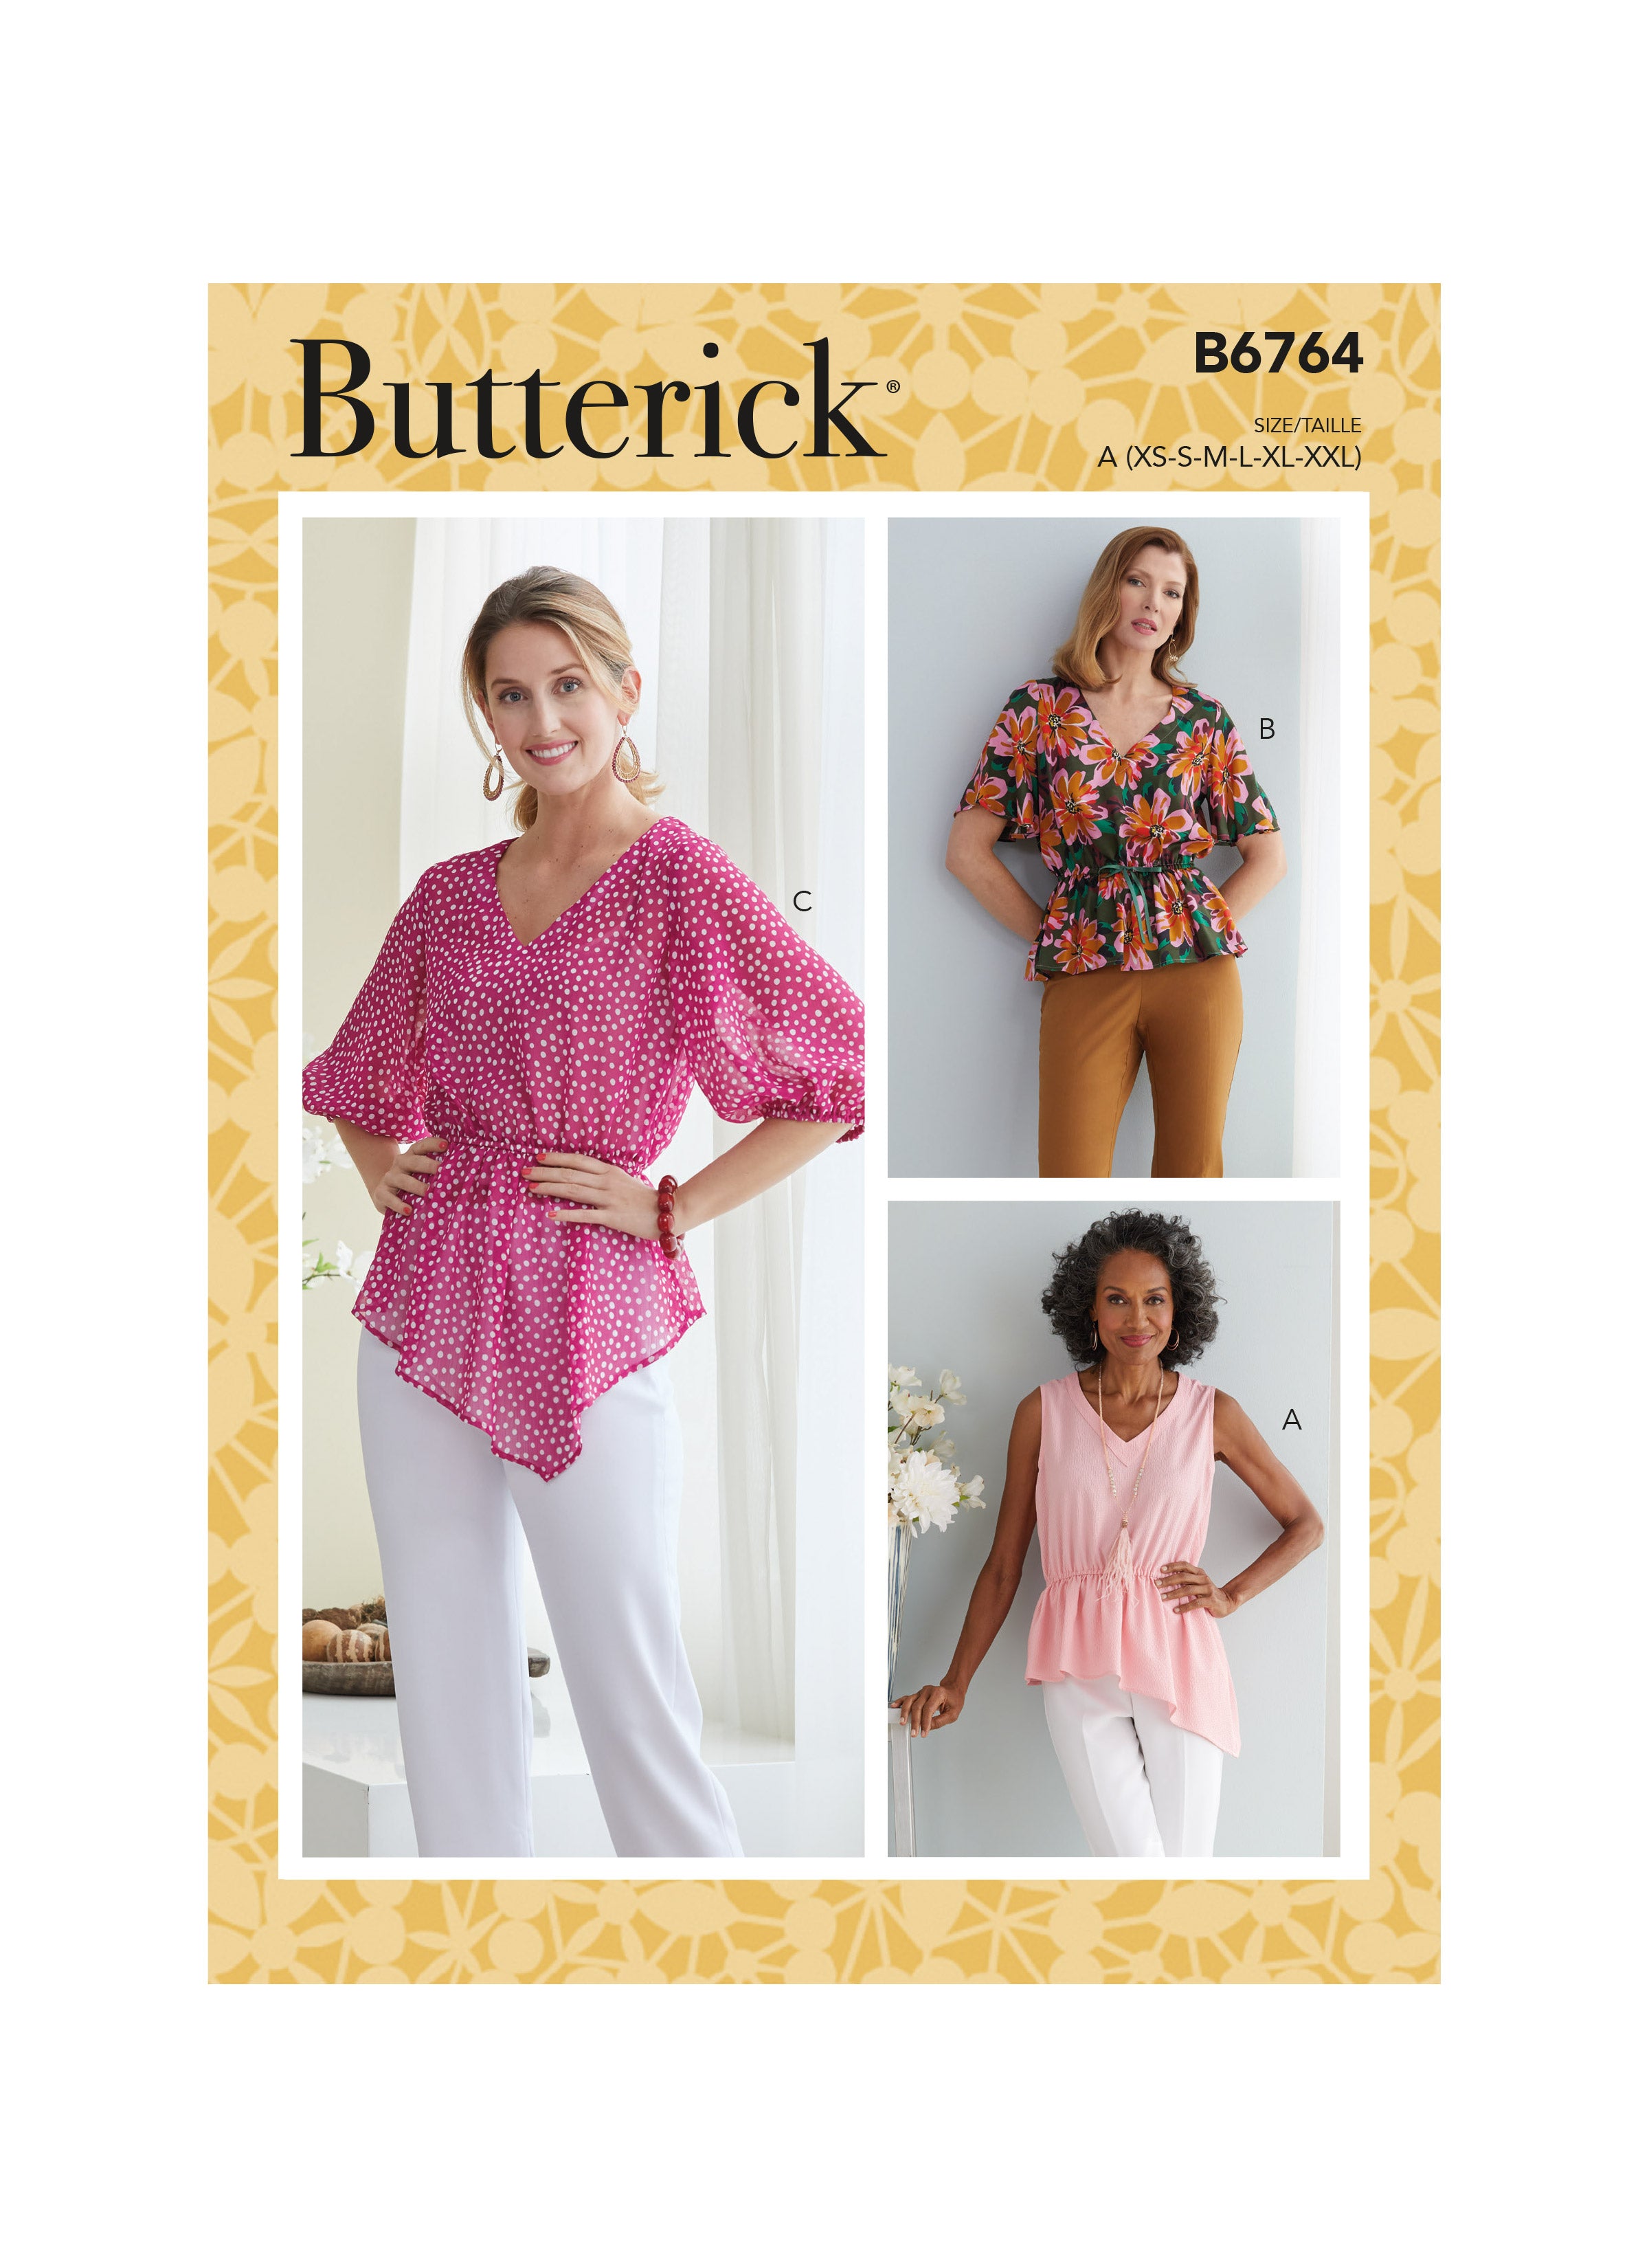 Butterick sewing pattern 6764 Misses' Tops from Jaycotts Sewing Supplies